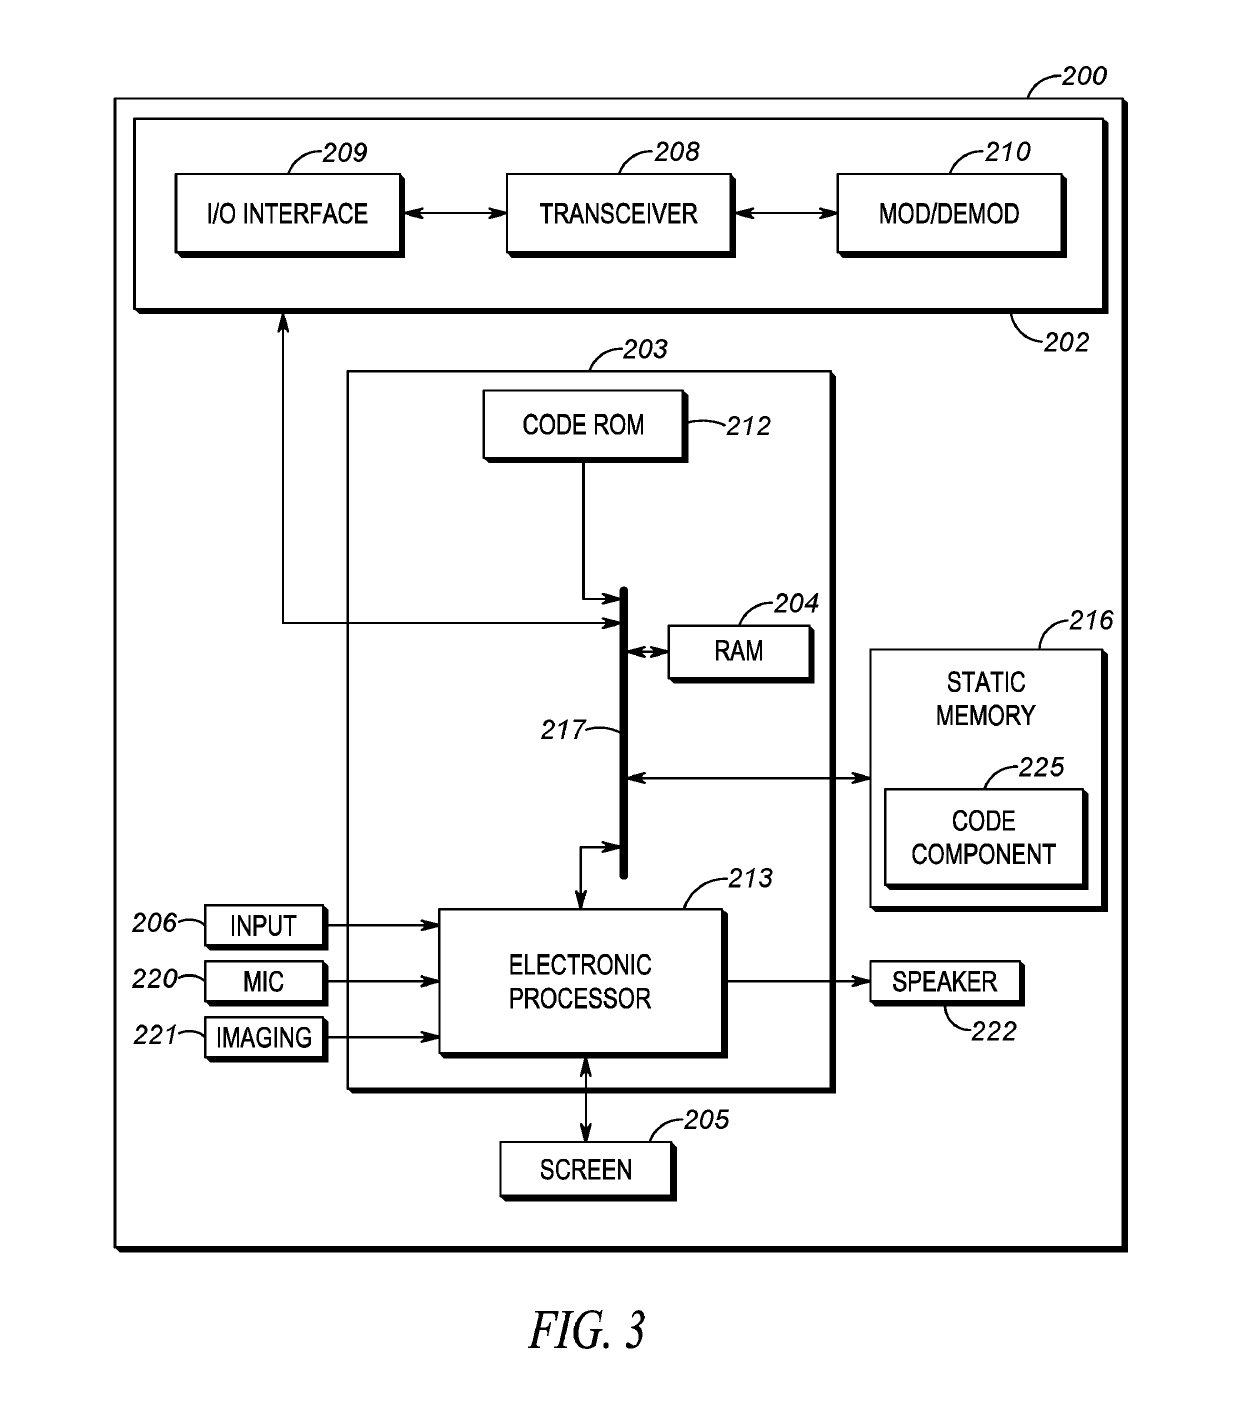 System for validating and appending incident-related data records in an inter-agency distributed electronic ledger